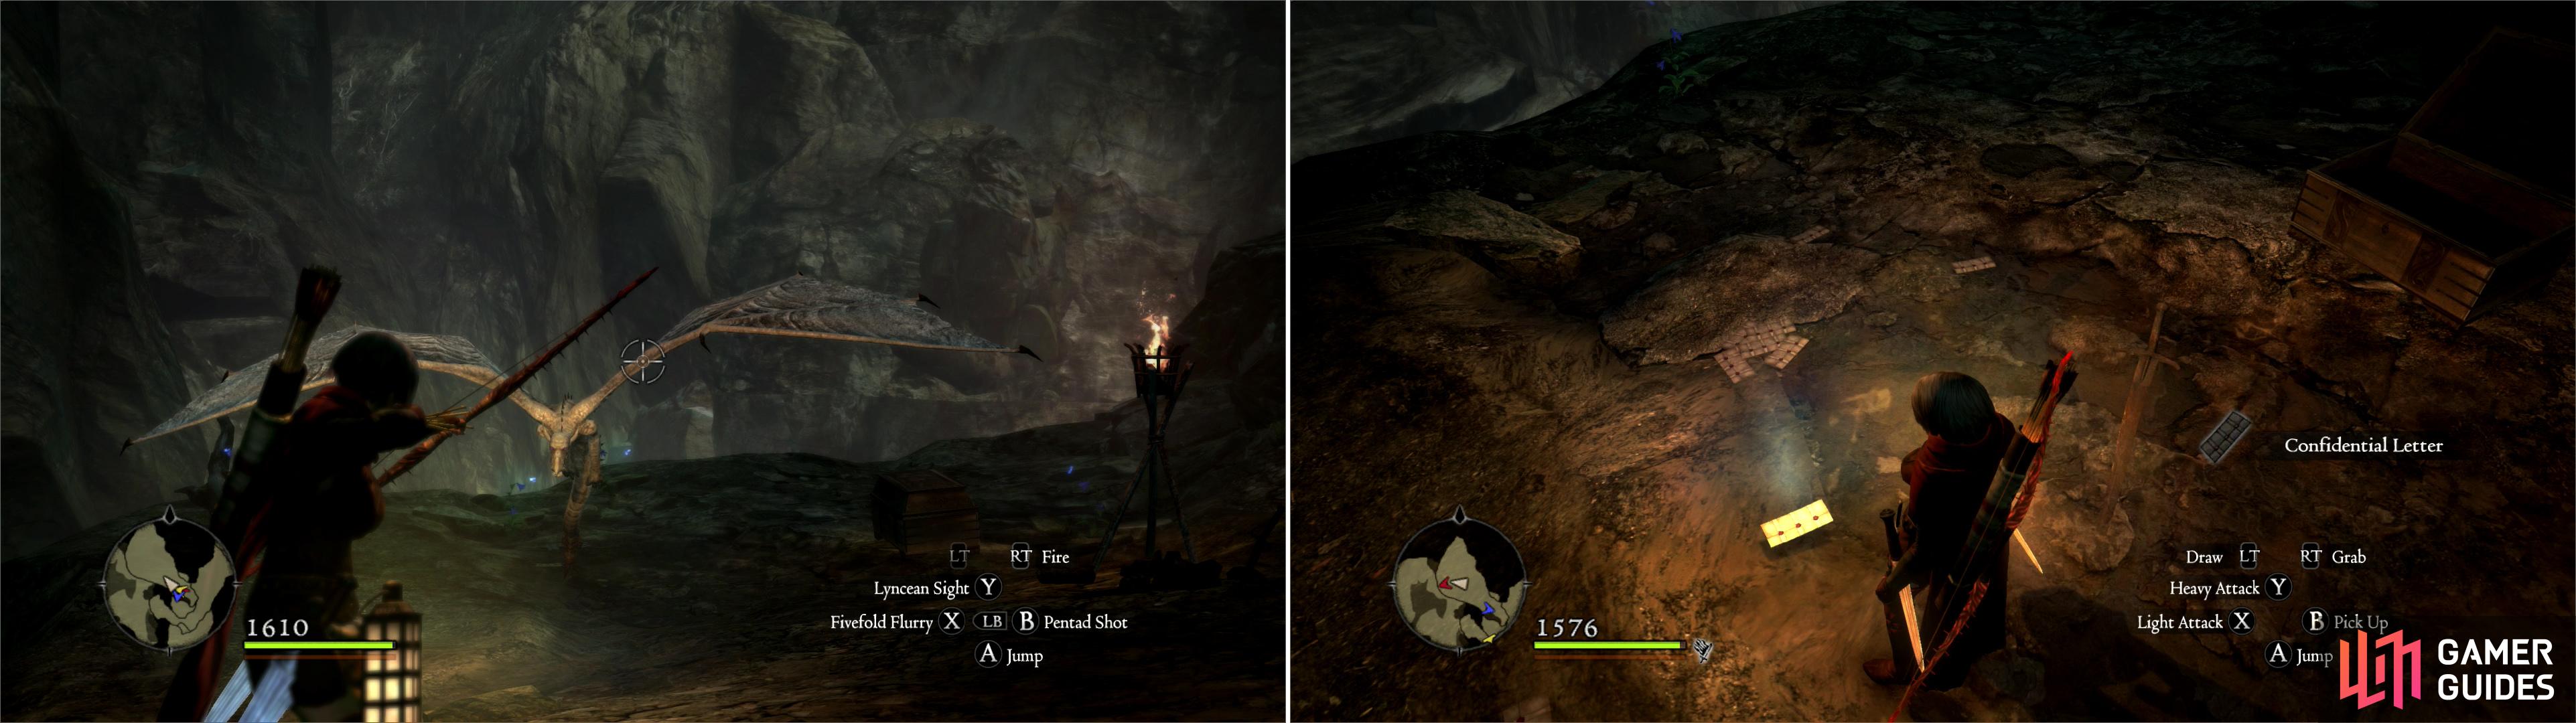 Confront the kleptomaniac Gargoyle on its watery legdge (left) then pick up the Confidential Letter Fedel lost (right).